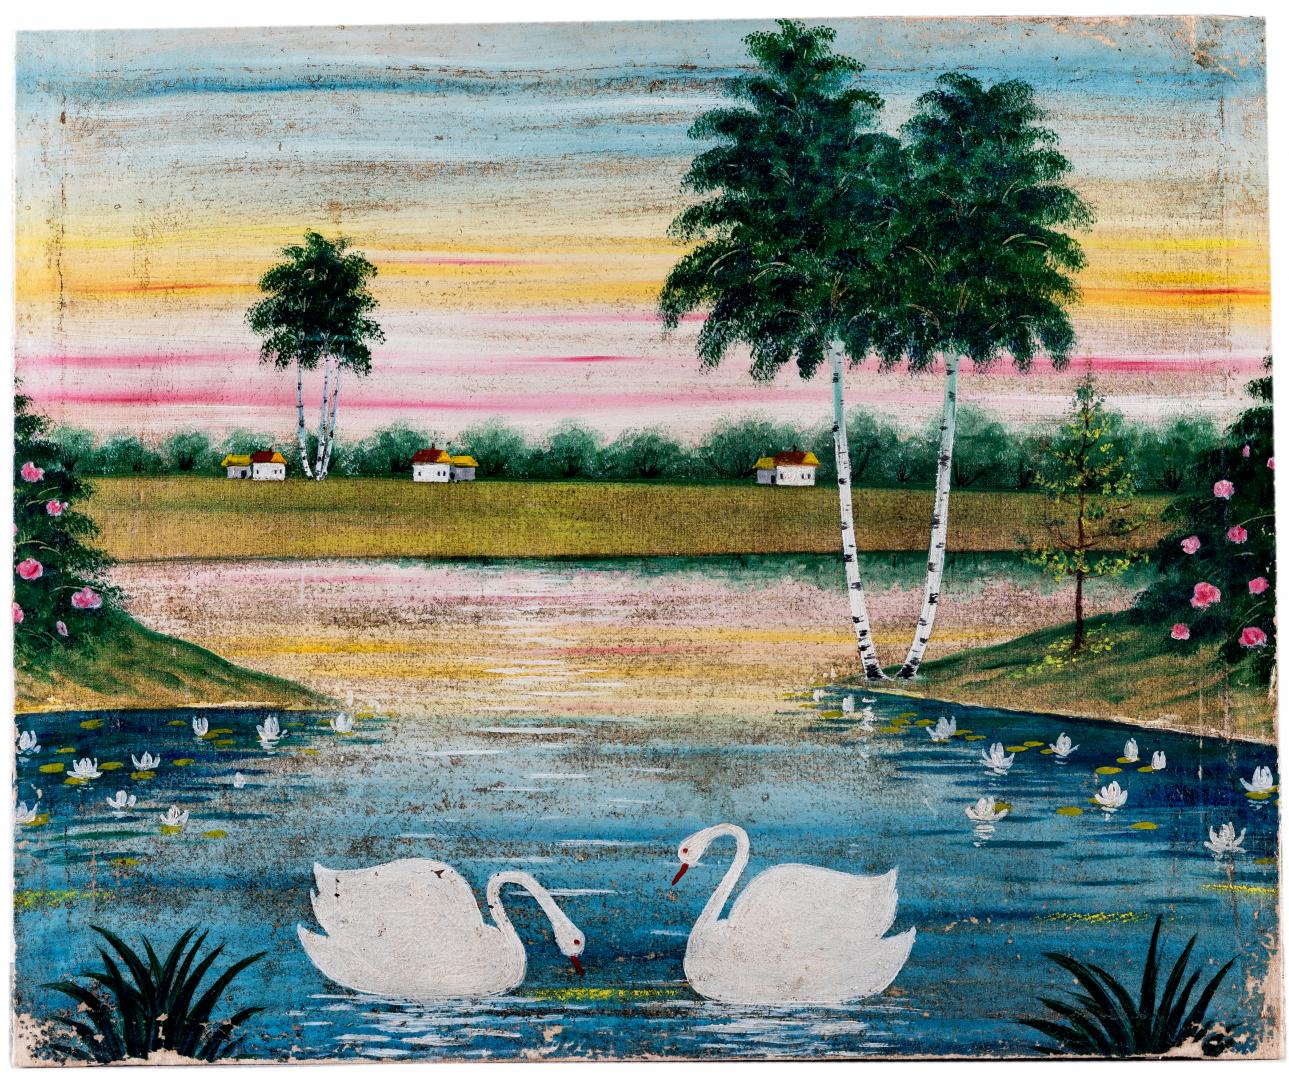 Swans among white lilies